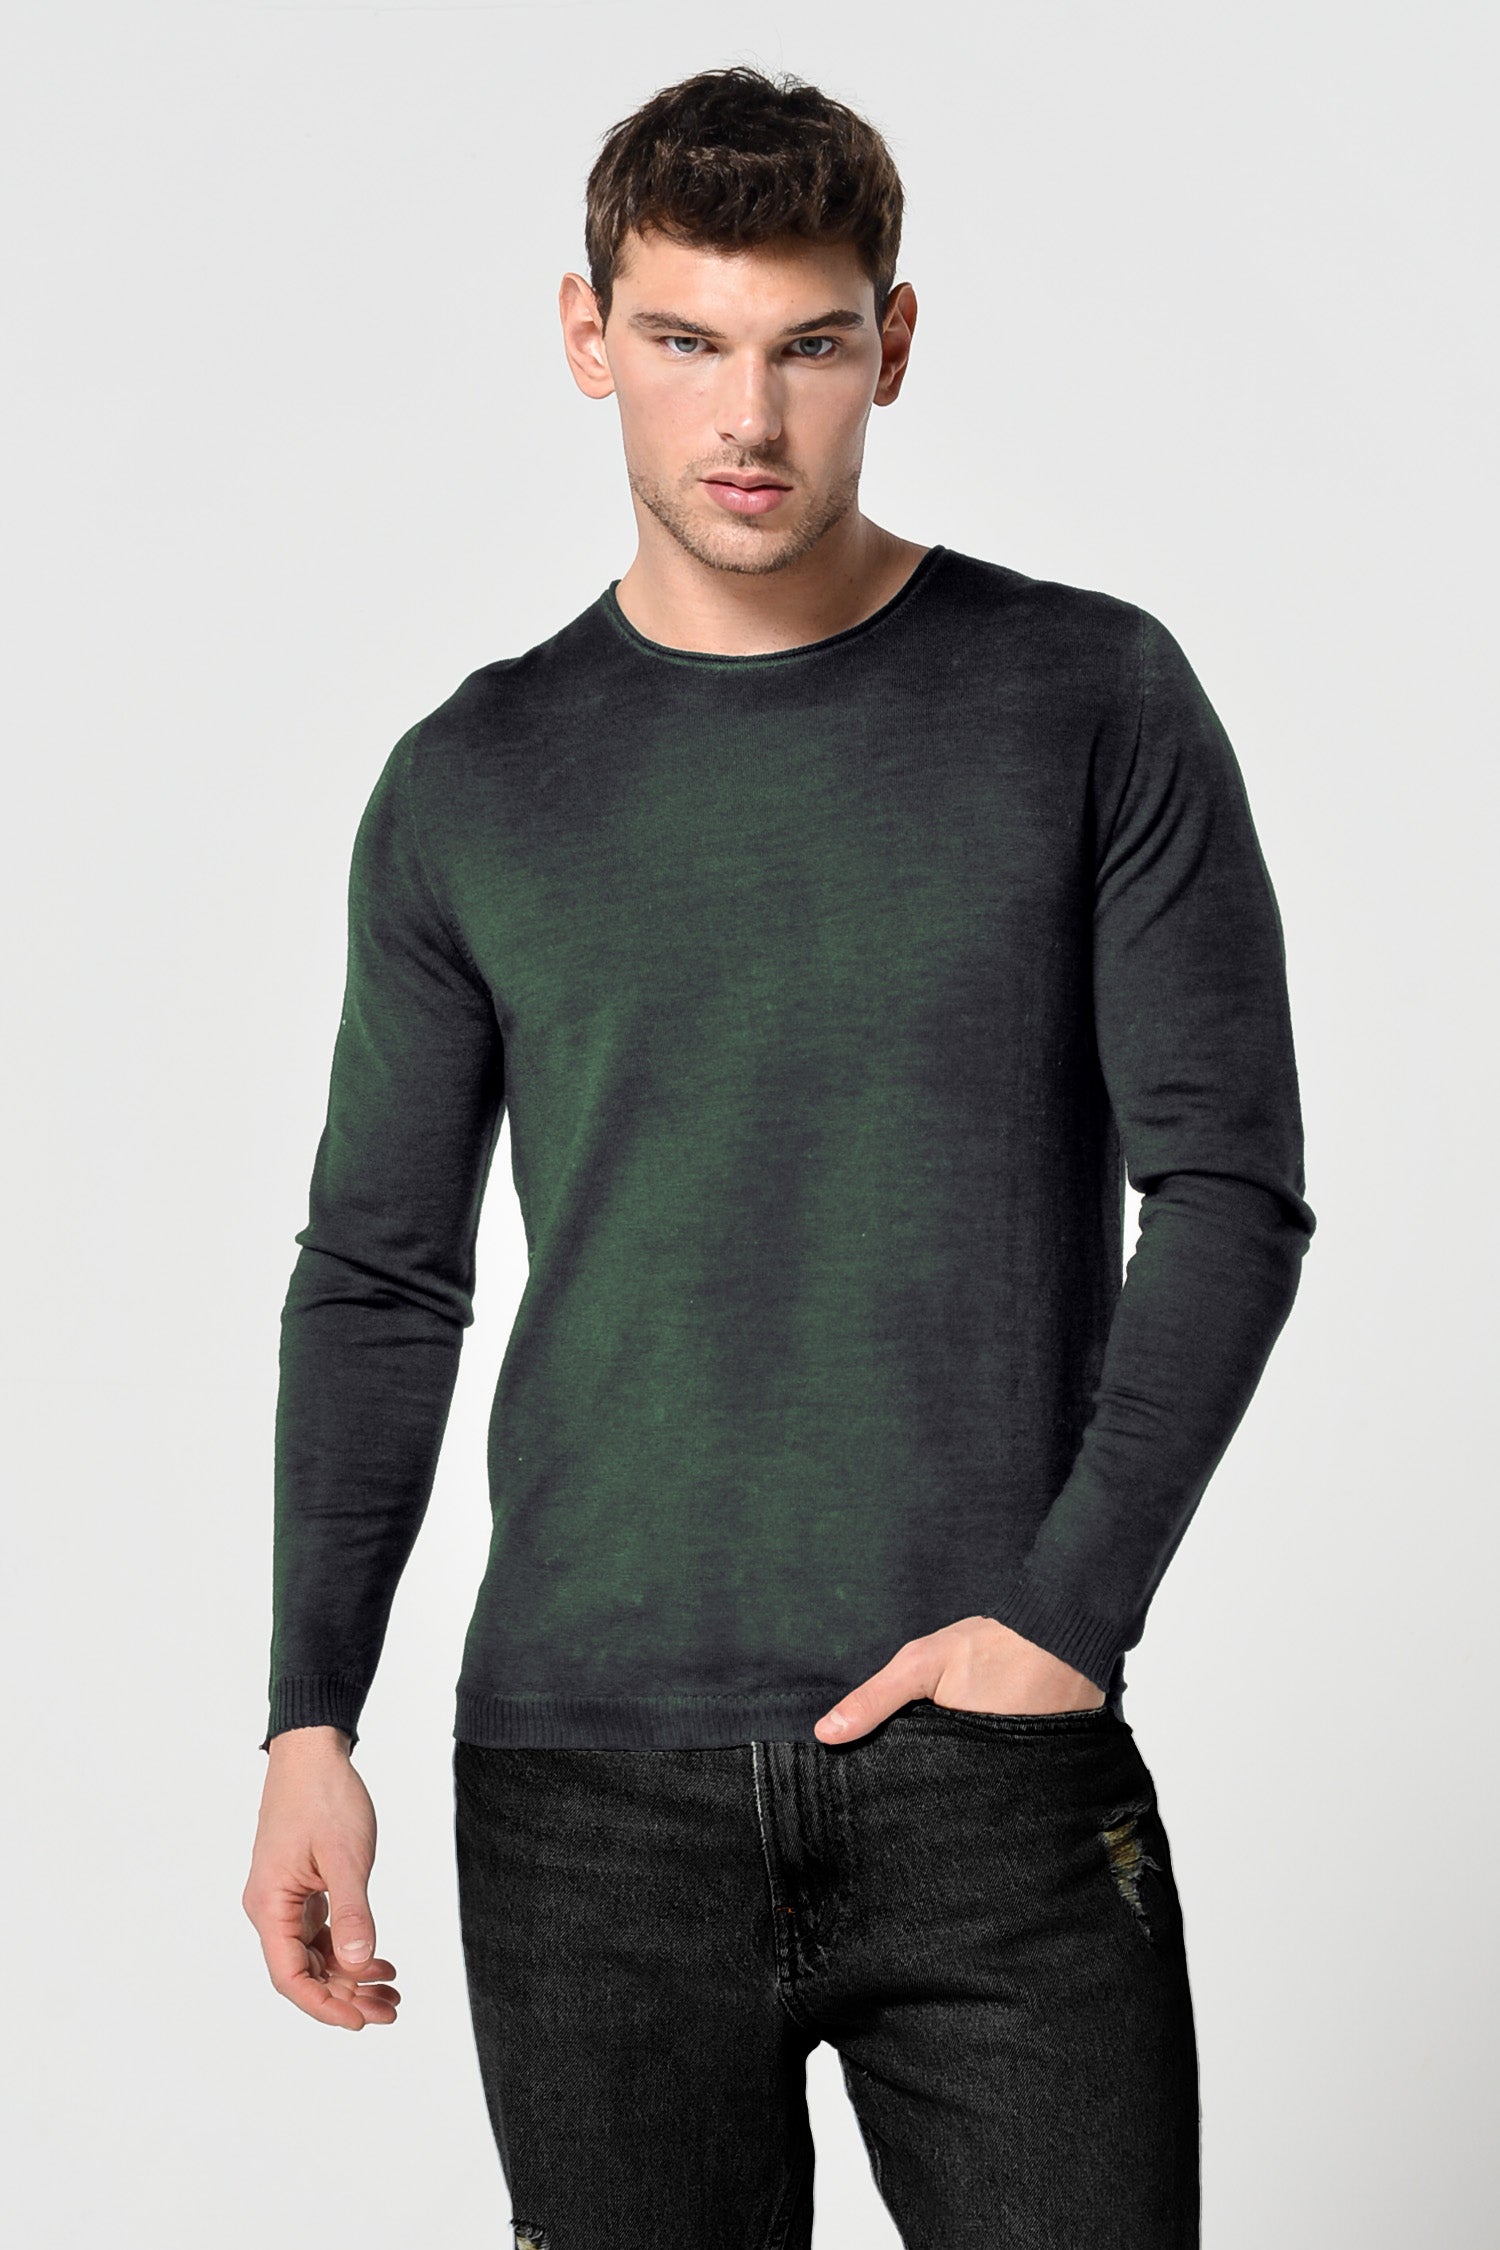 Sion Rock Art Sweater - Dunite